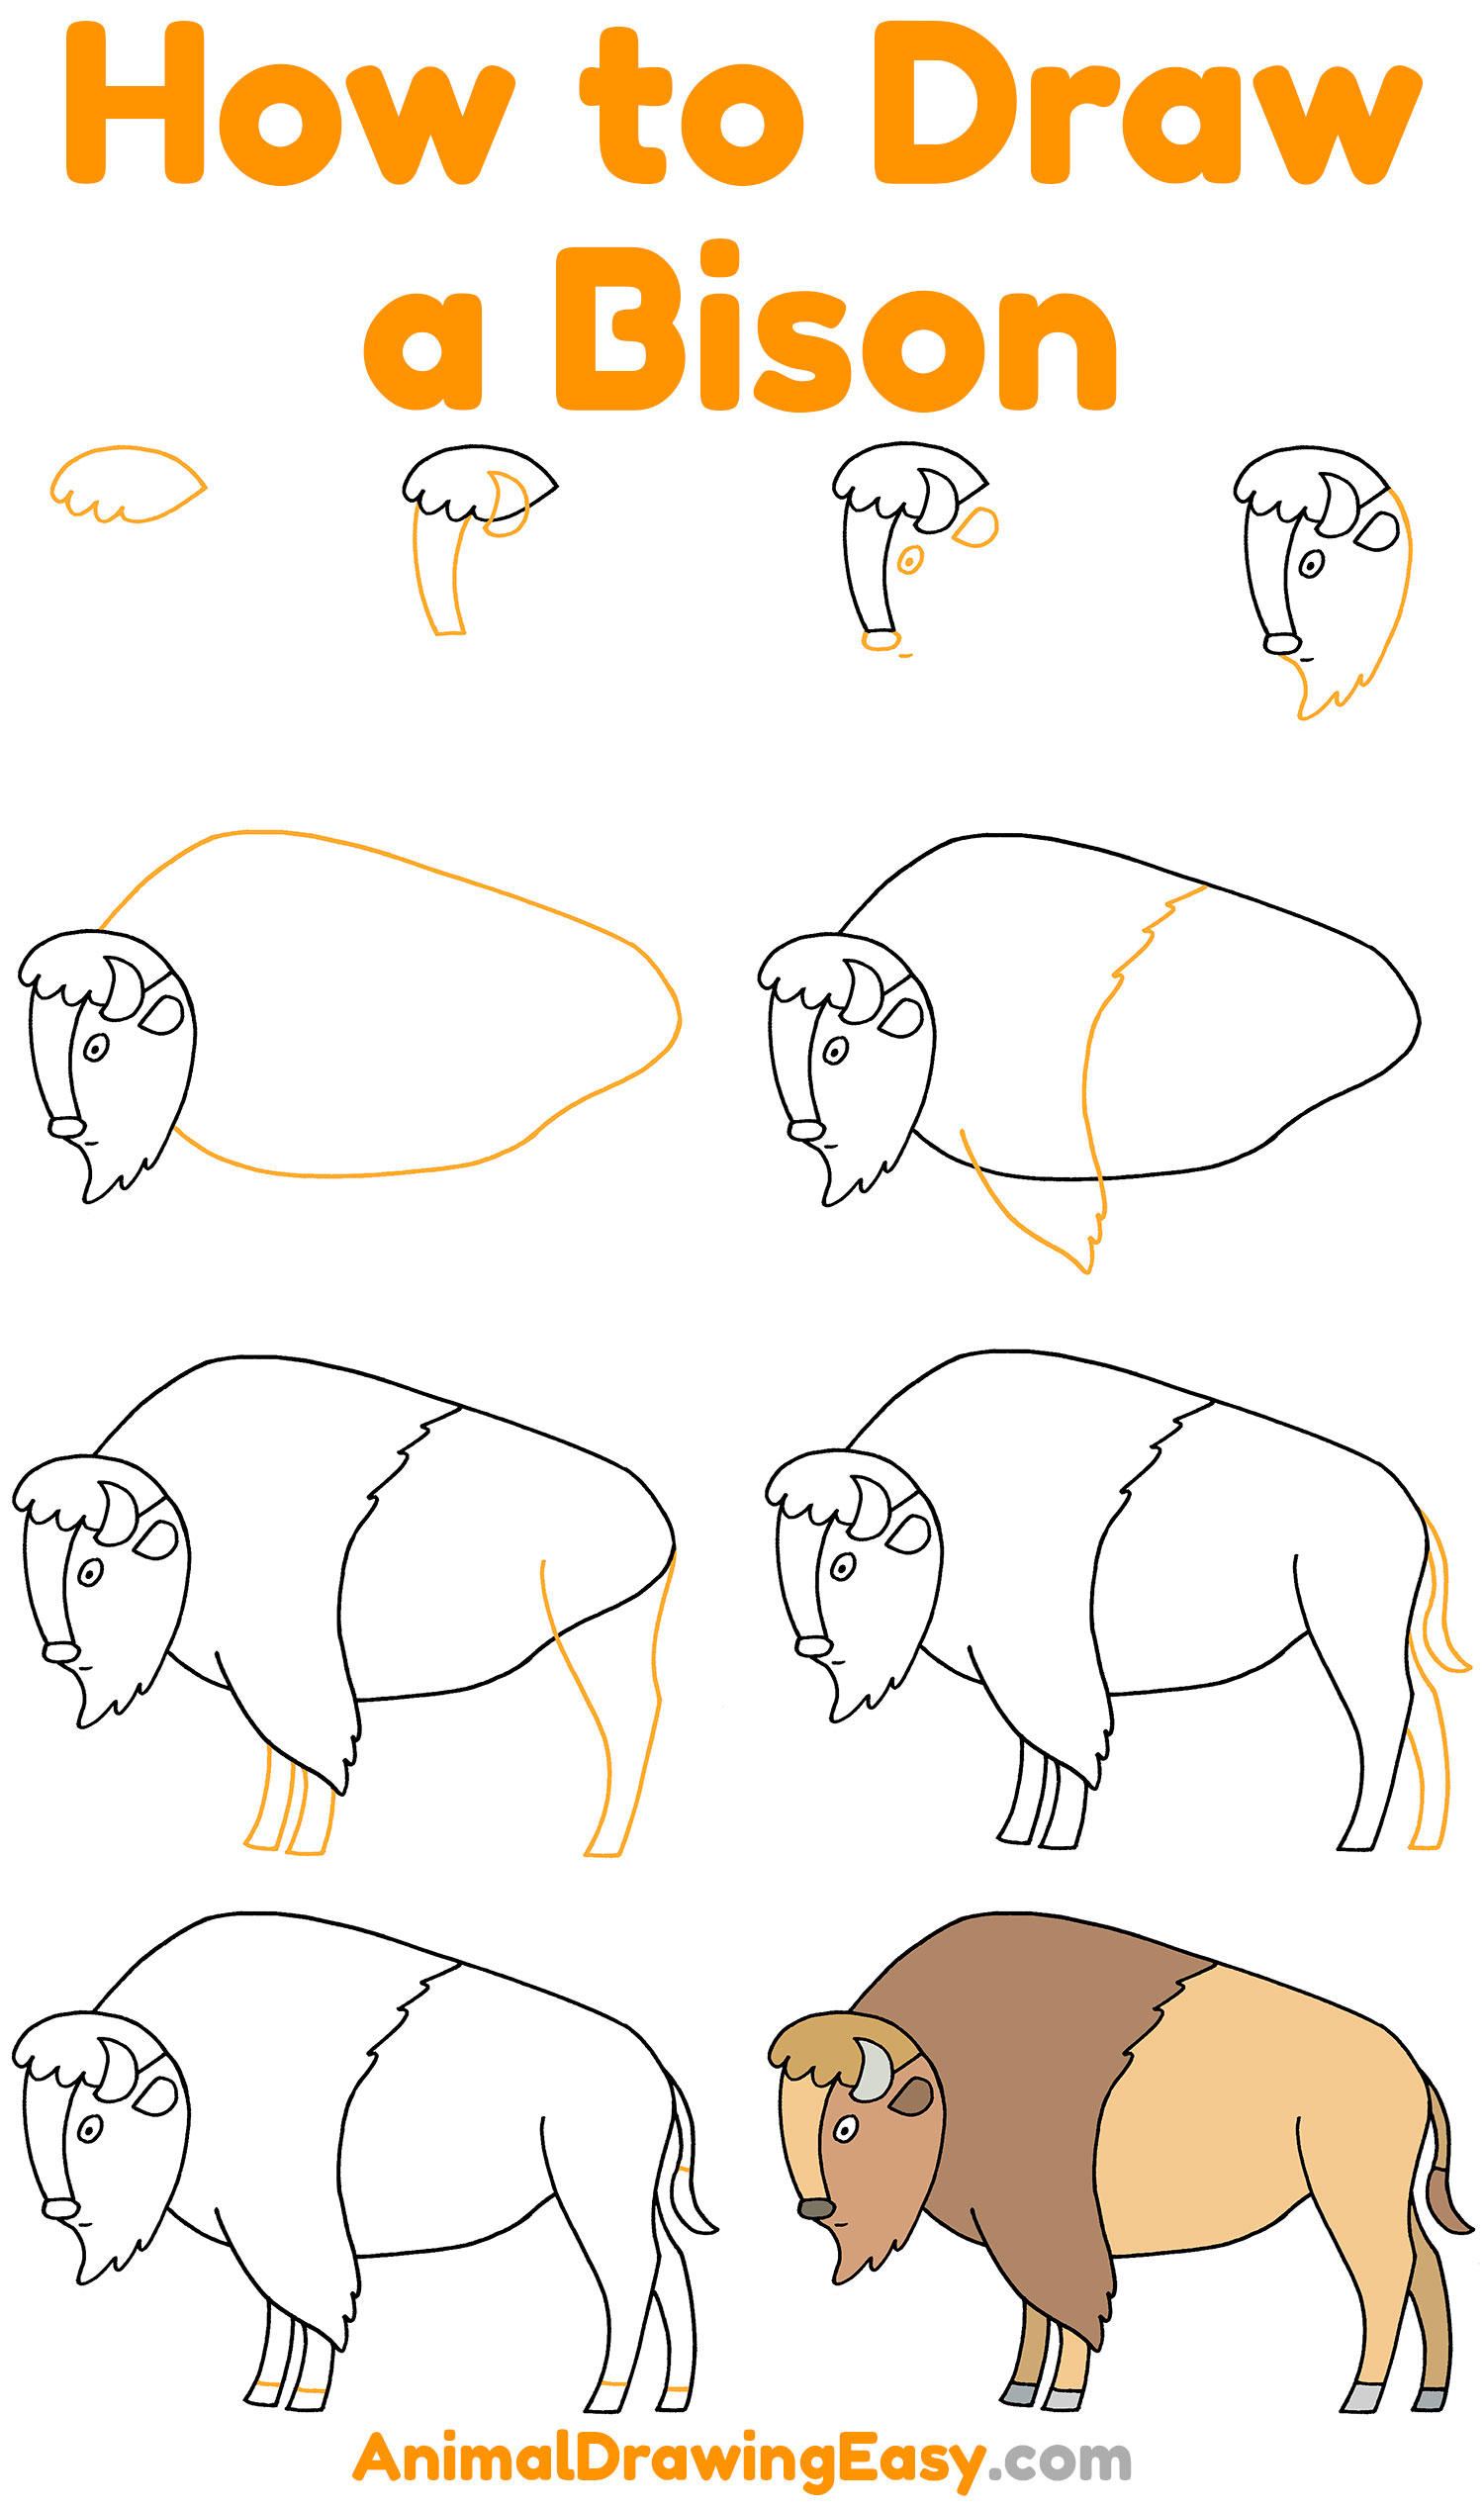 How to Draw a Bison Step by Step